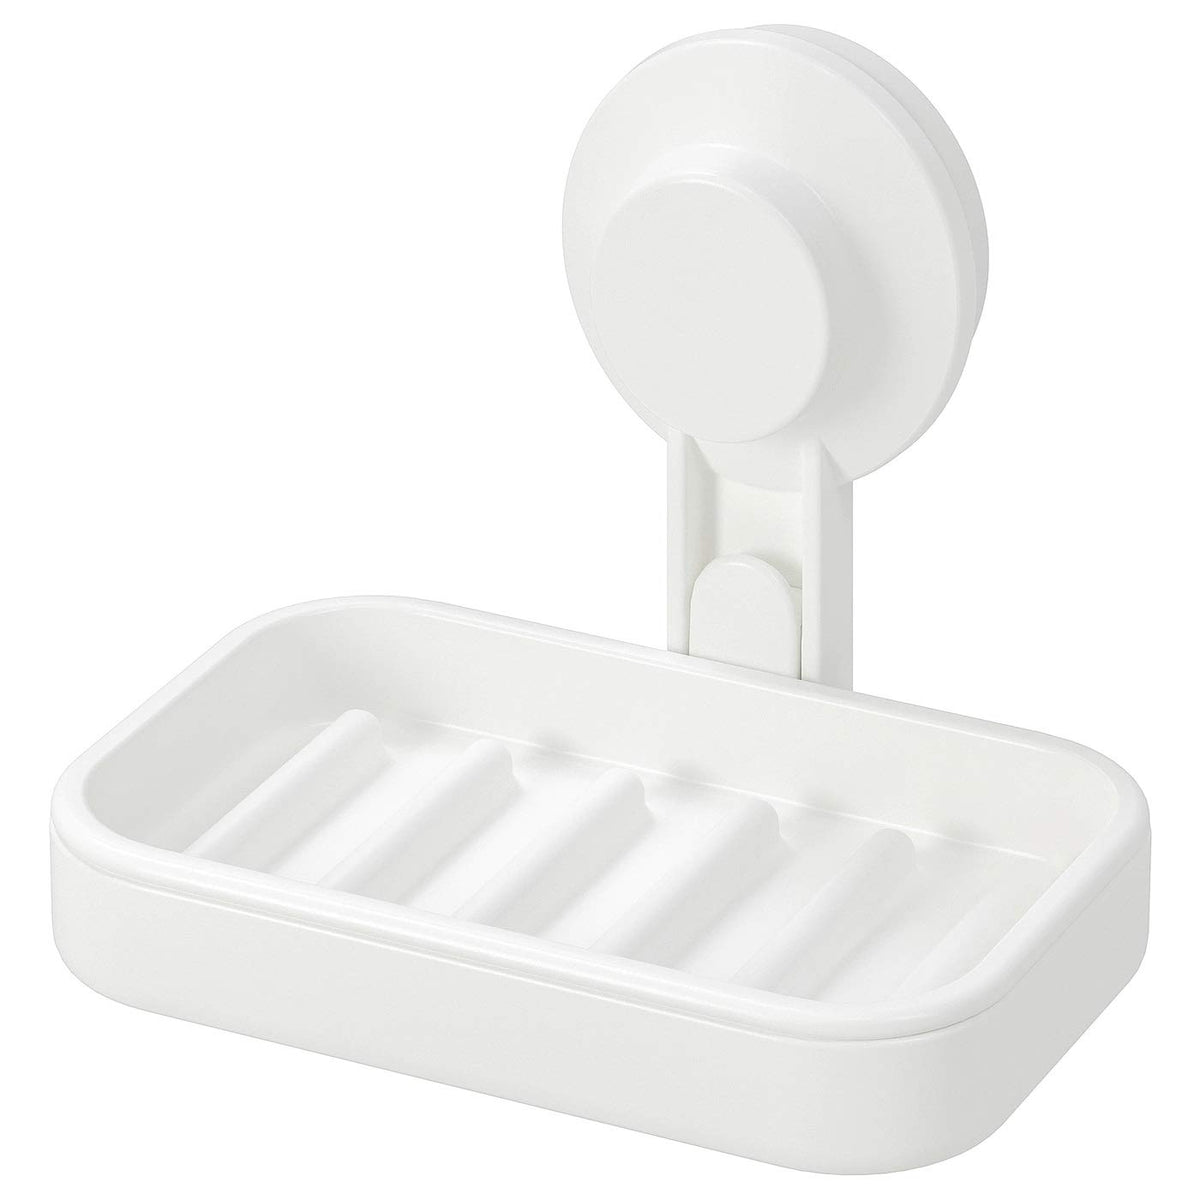 KROKFJORDEN Soap dish with suction cup, zinc plated - IKEA